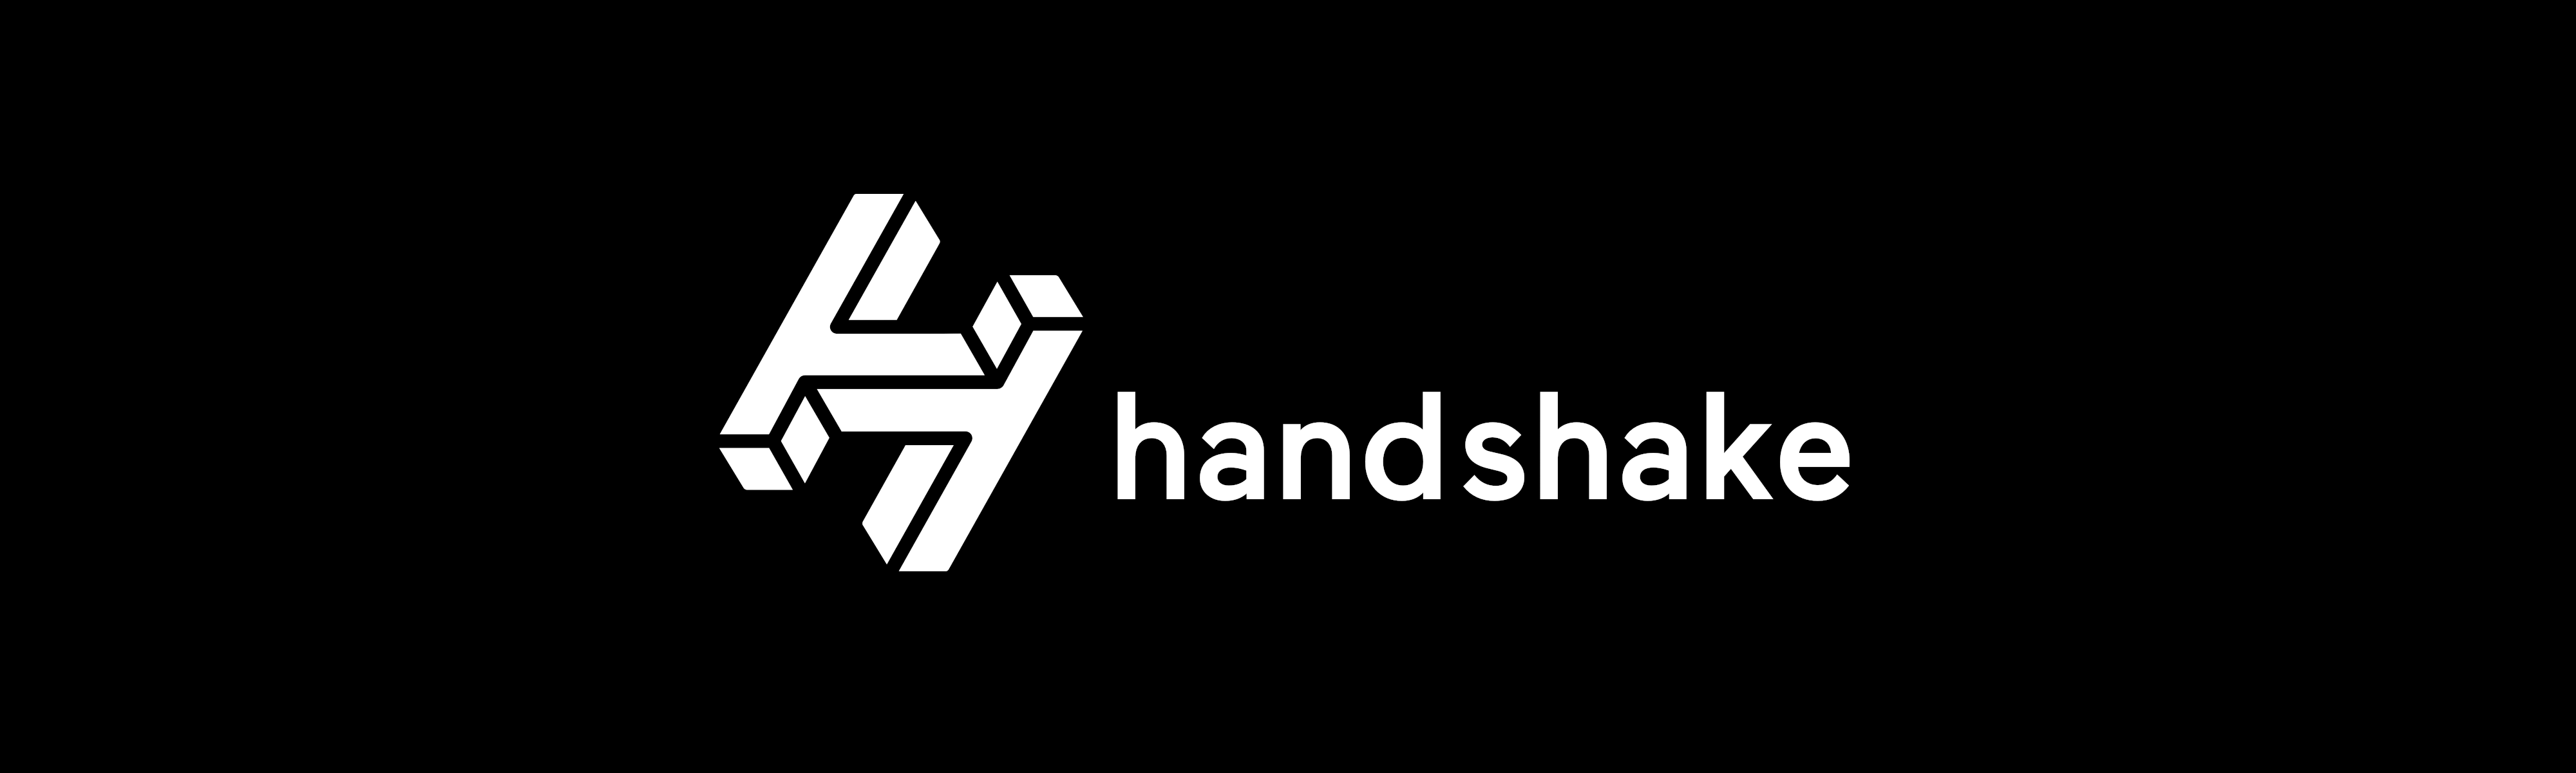 Handshake - What is it and why is it important?